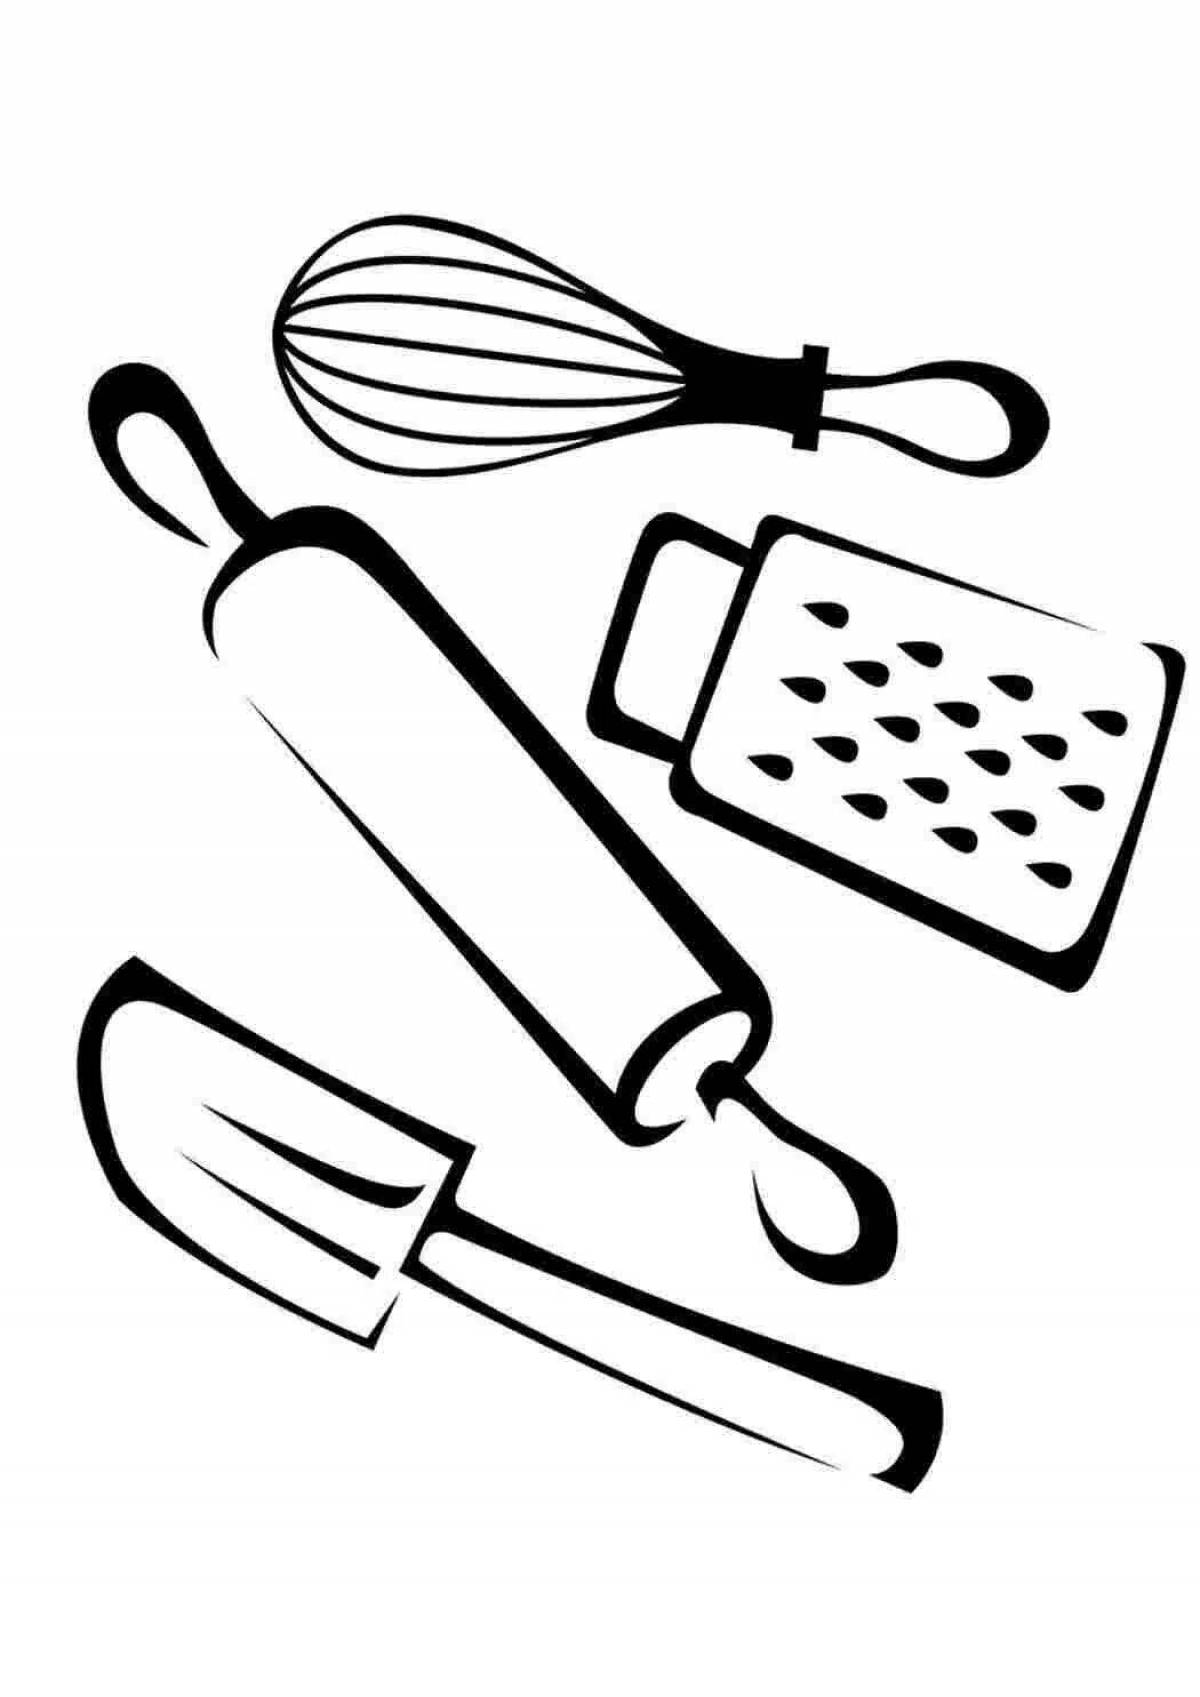 Cute kitchen utensils coloring book for kids